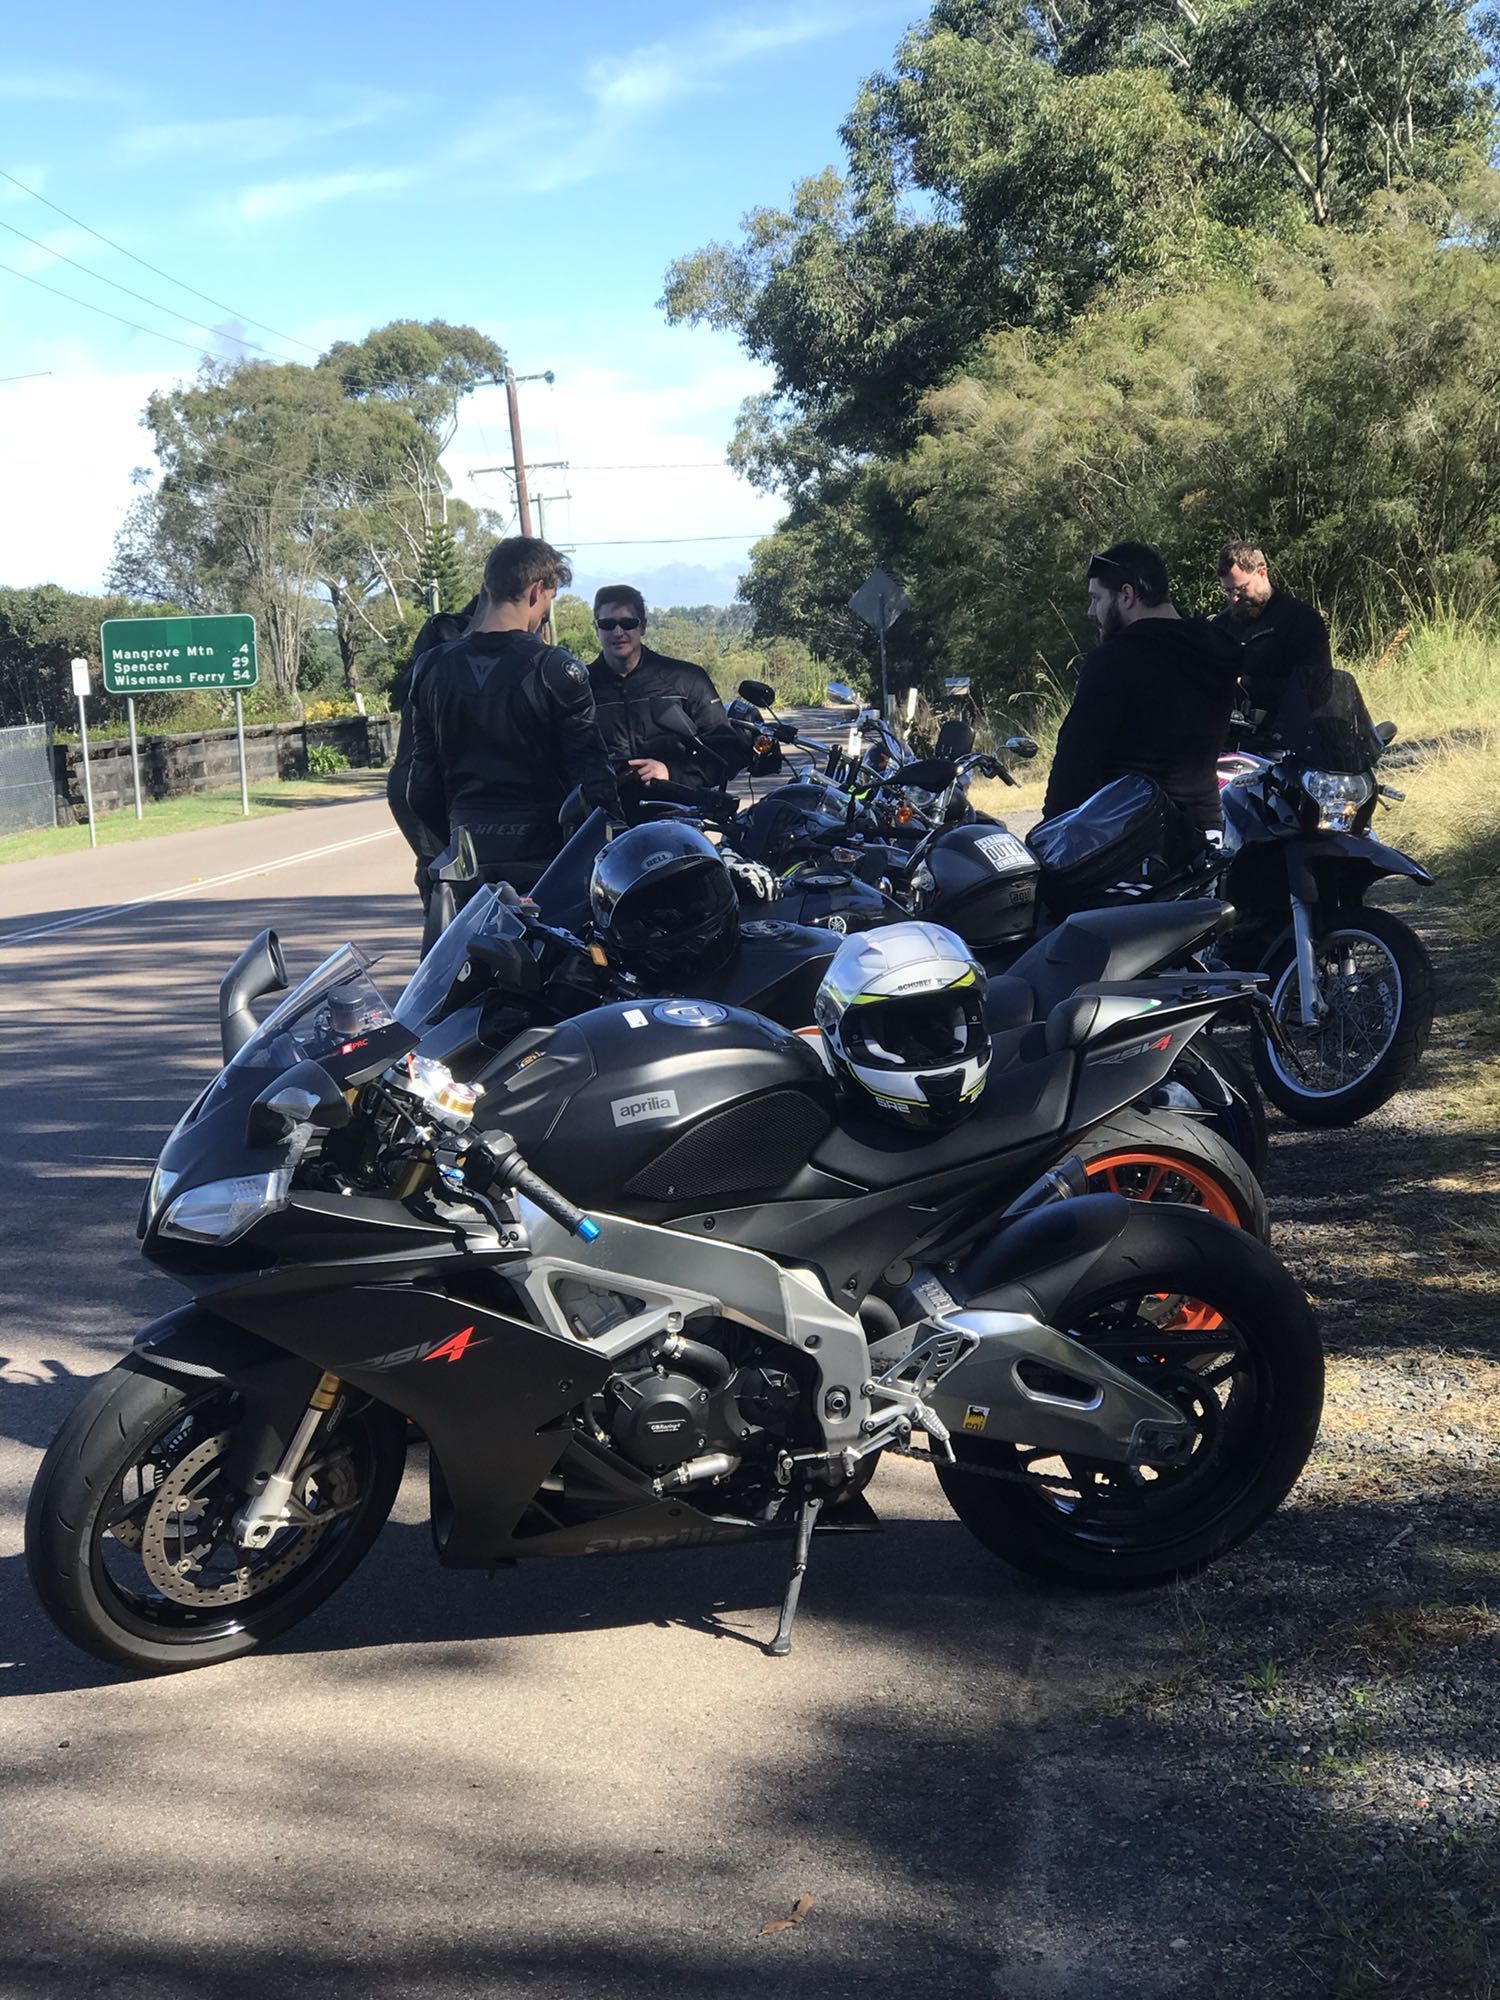 Wisemans ferry ride and pac ride 